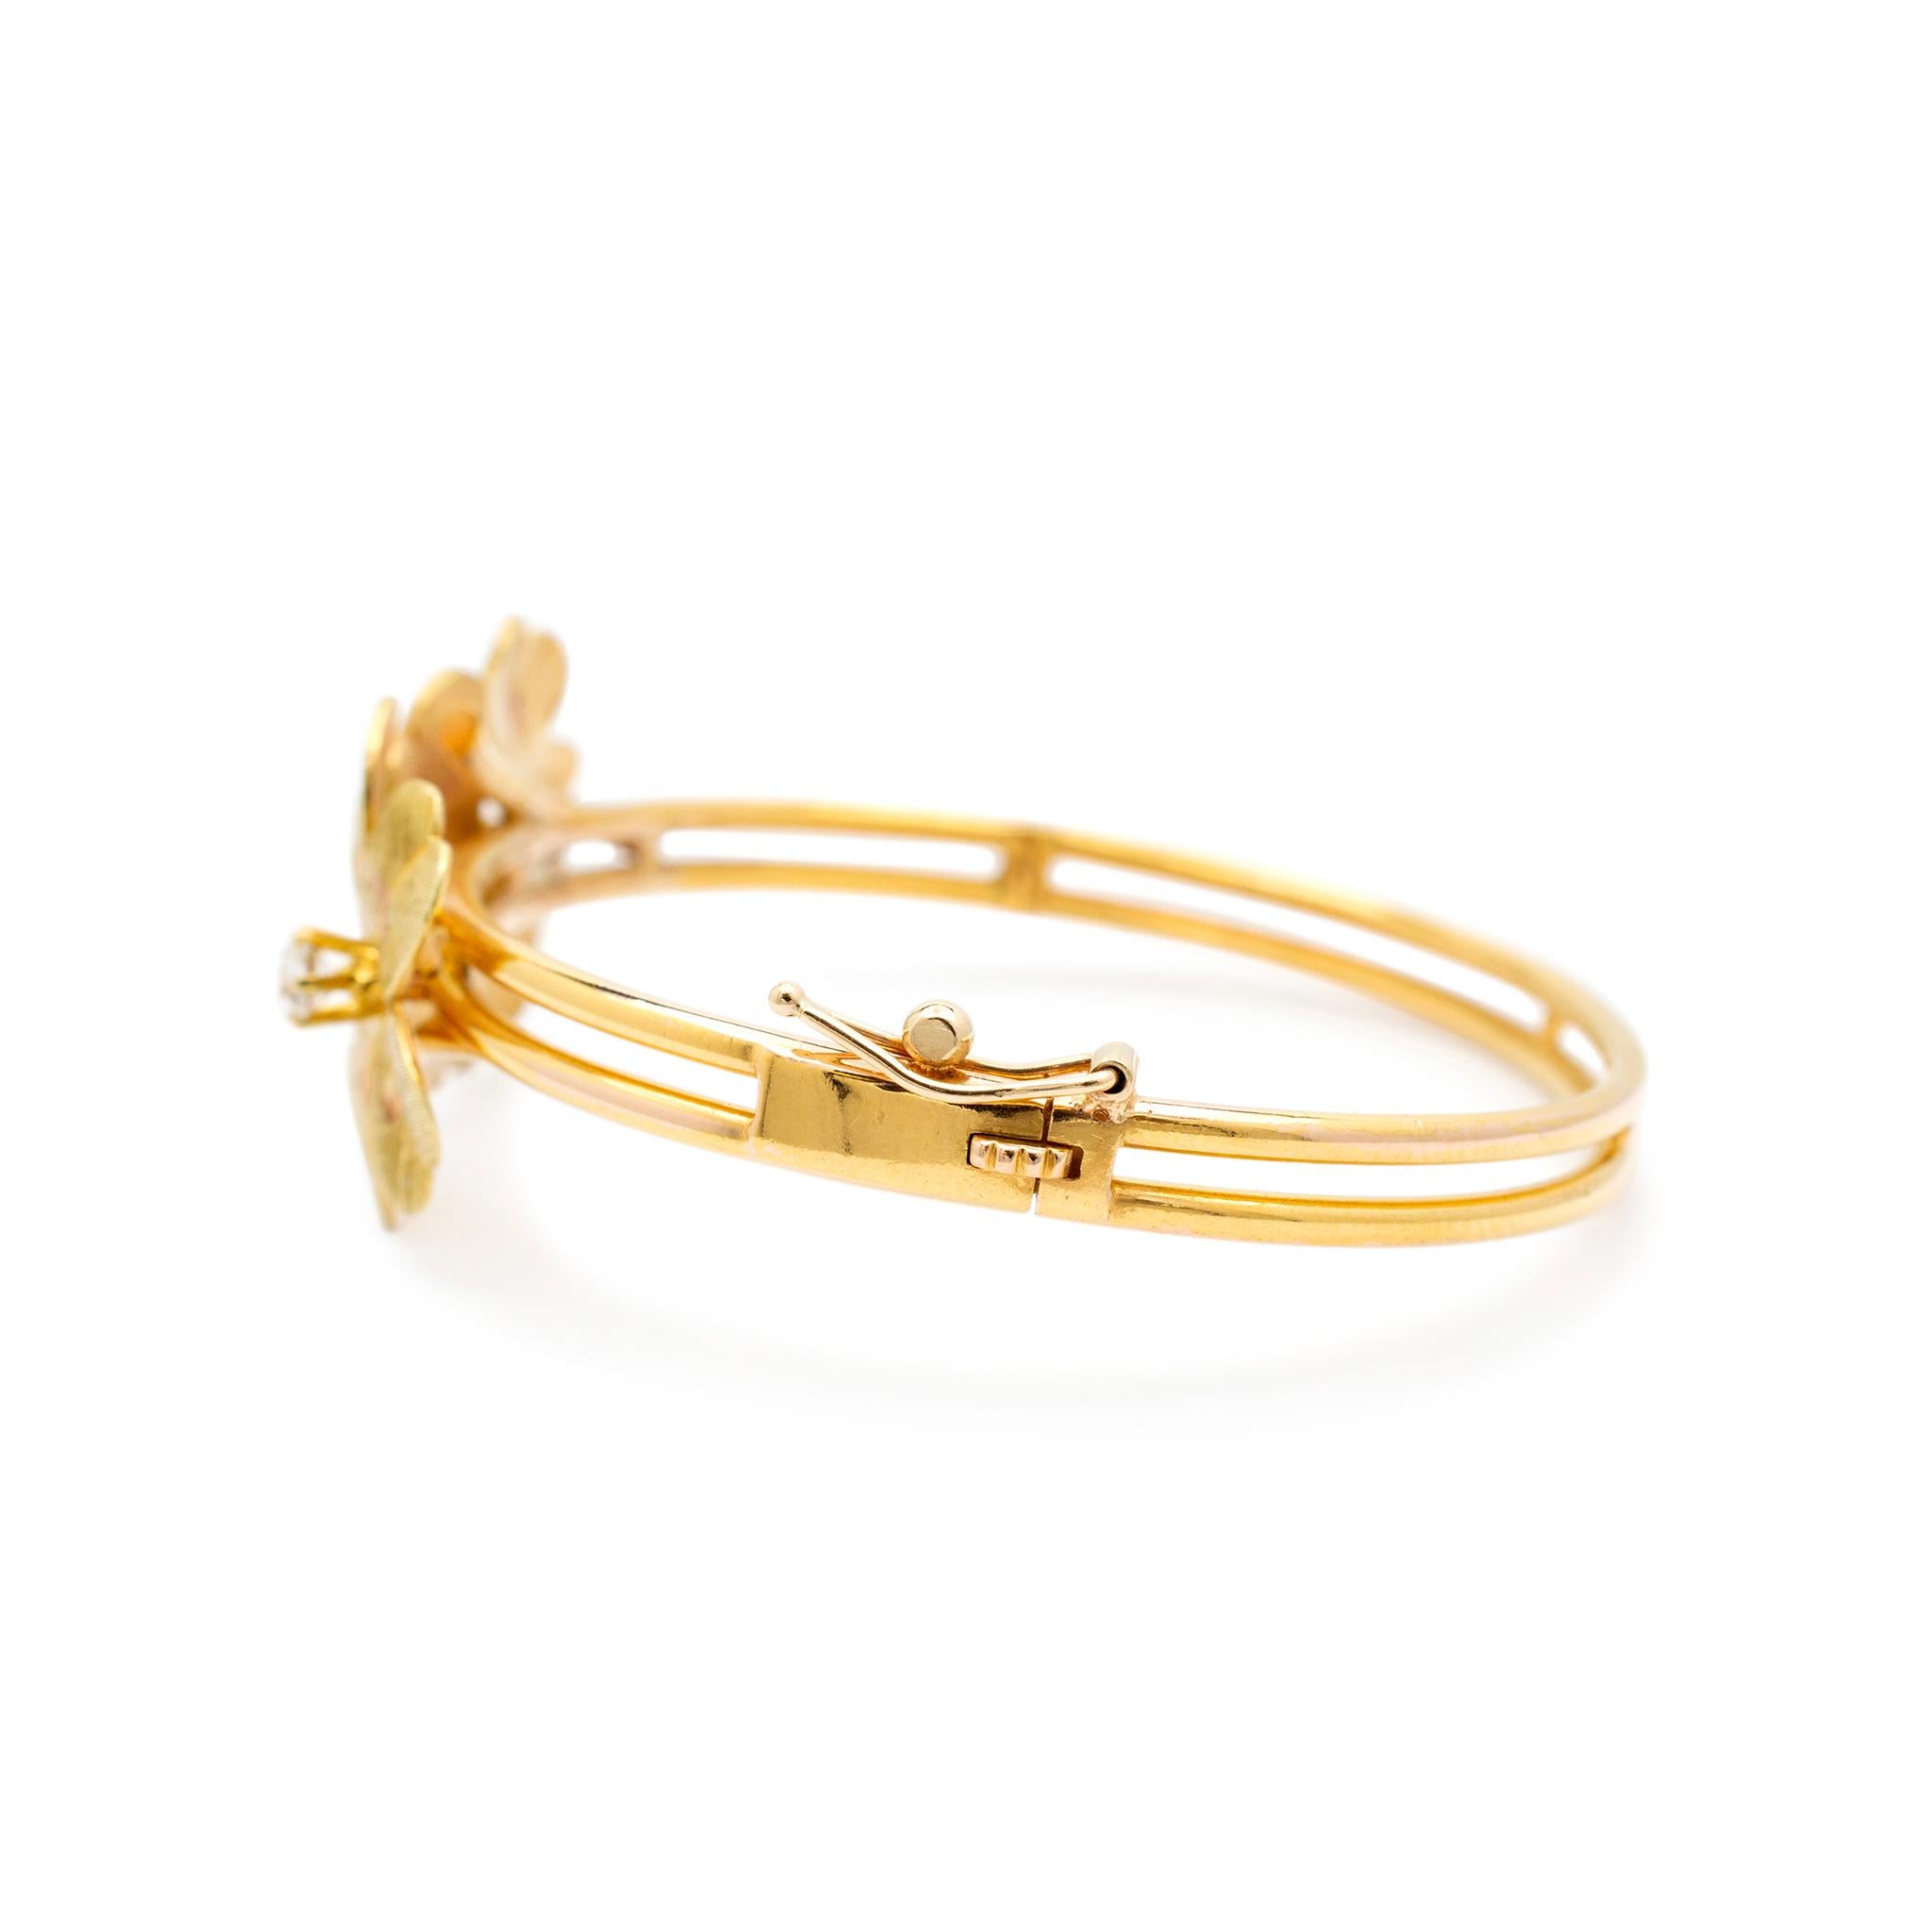 Gender: Ladies

Metal Type: 18K Yellow Gold

Length: 5.75 Inches

Band Width: 4.50 mm

Weight: 18.68 grams

Ladies 18K yellow gold diamond bangle bracelet.  Flower decoration measures 20.30mm in width.

Pre-owned in excellent condition. Might shows